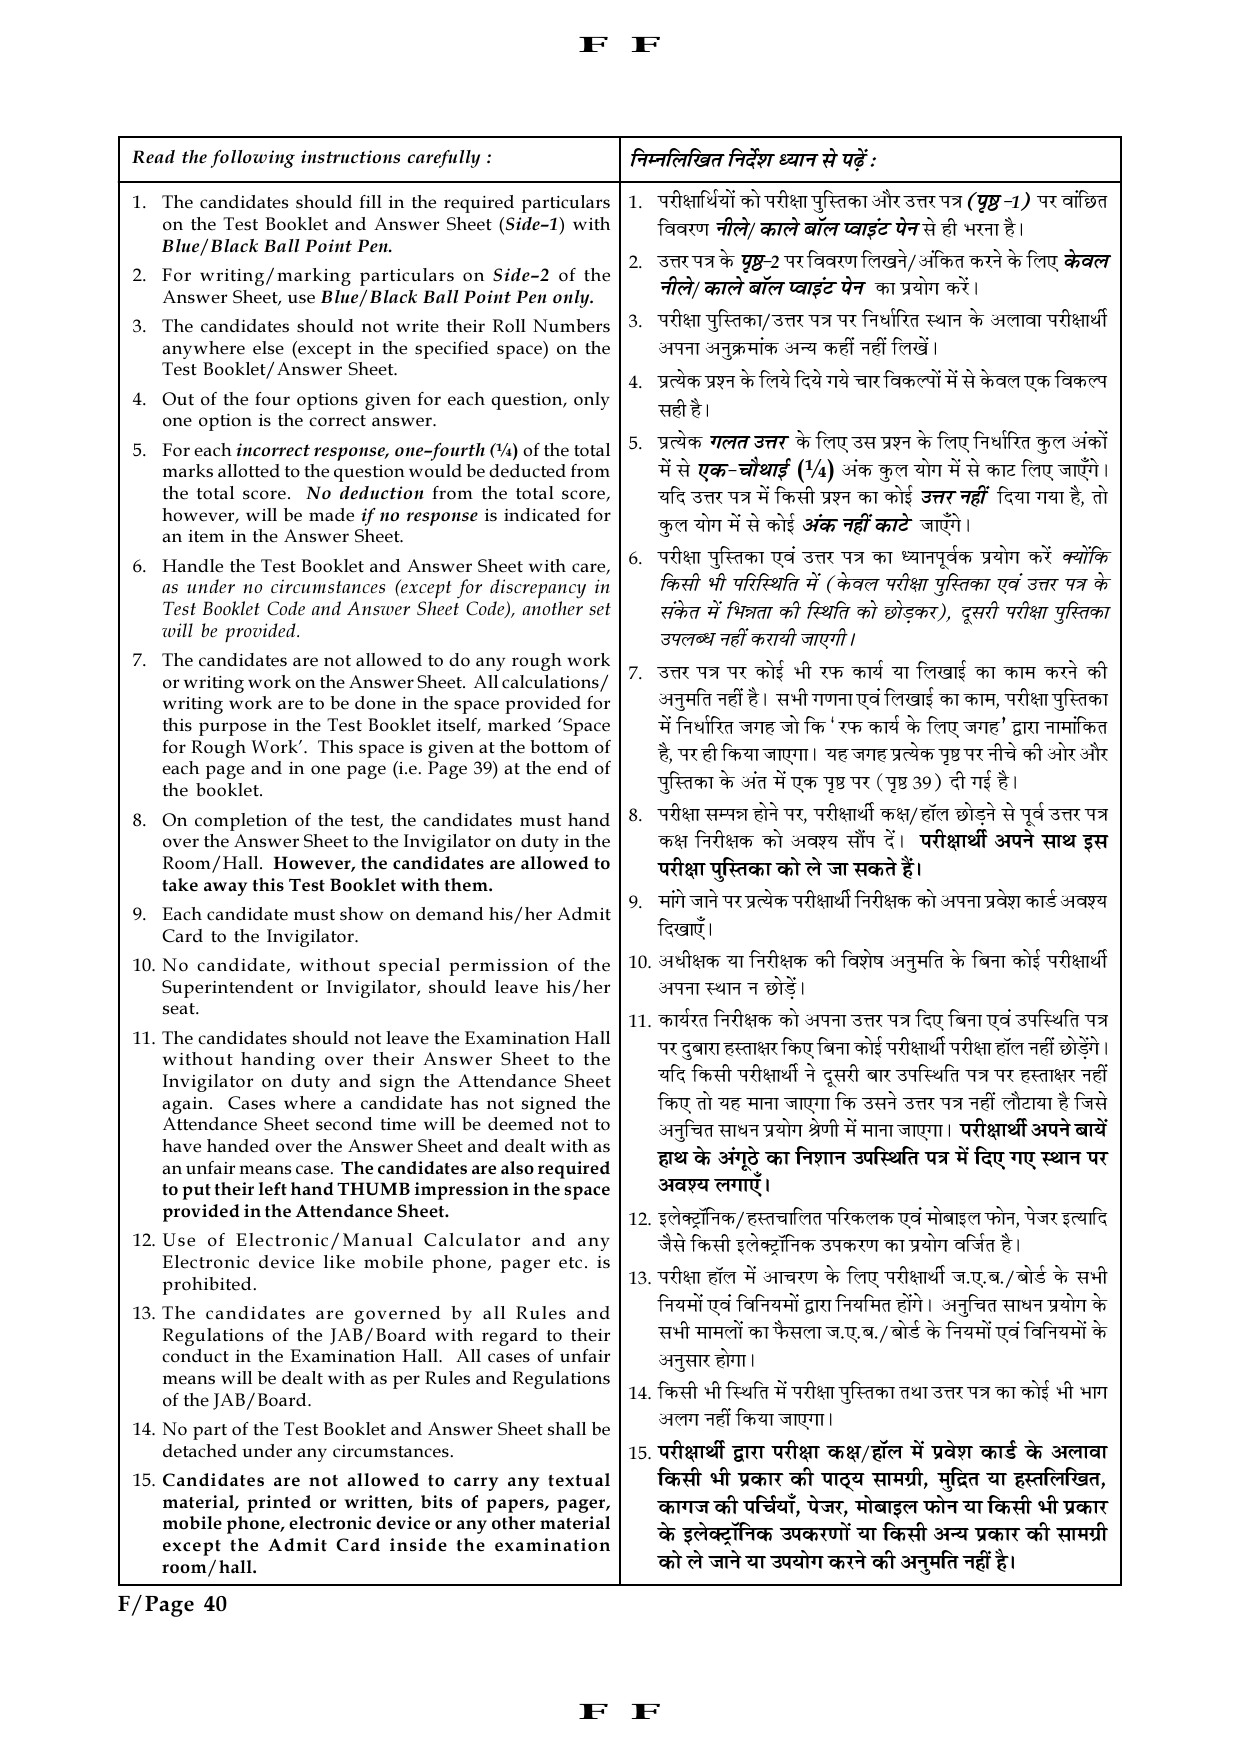 JEE Main Exam Question Paper 2016 Booklet F 39